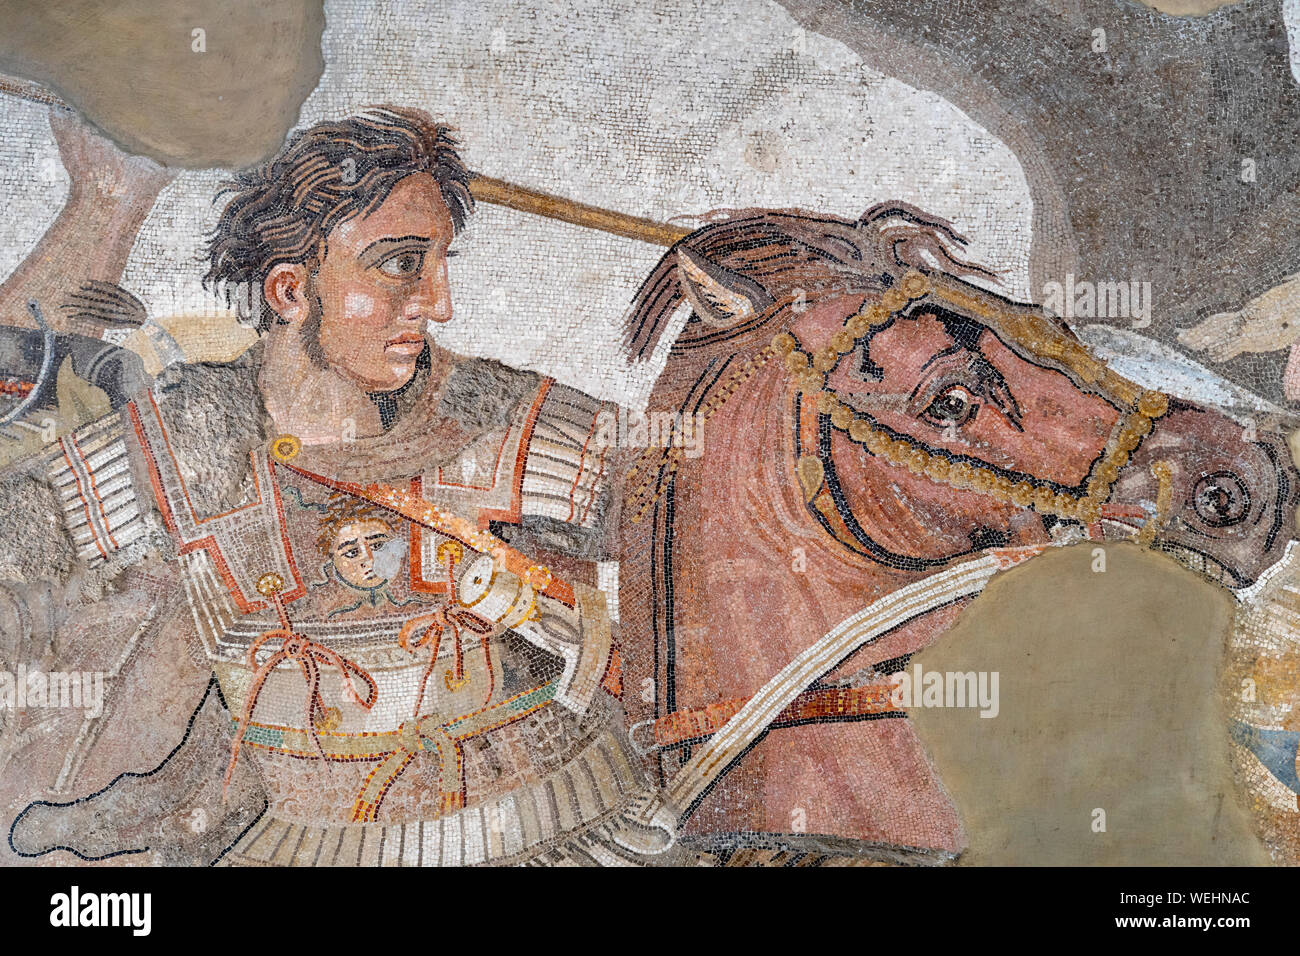 Detail of the Alexander the Great Mosaic depicting Alexander on horseback. Originally from the House of the Faun in Pompeii, now at the Naples Archael Stock Photo